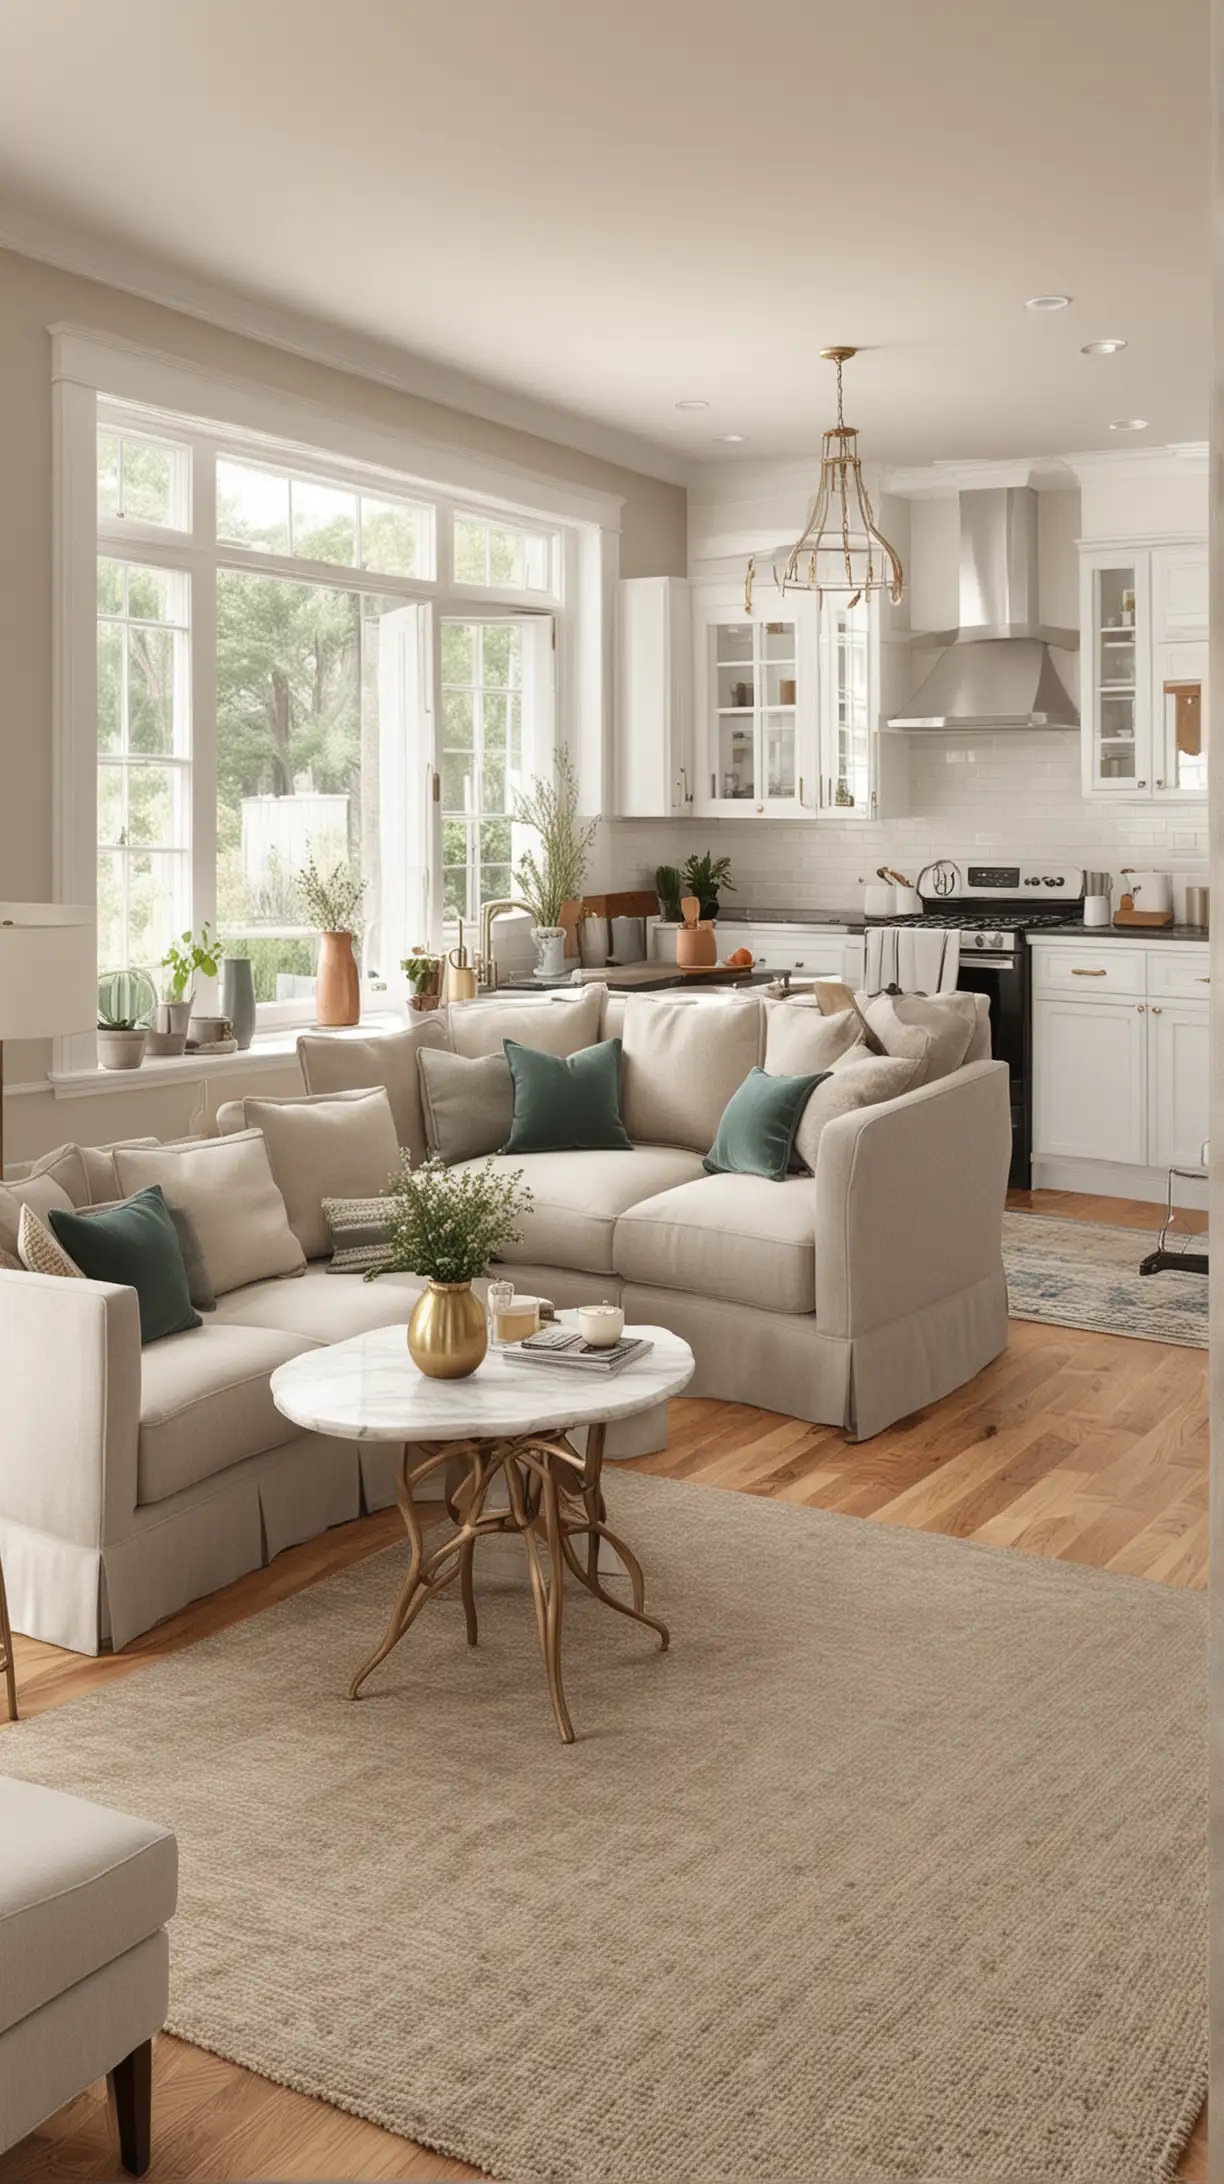 Unified Color Scheme in Small Open Concept Kitchen Living Room